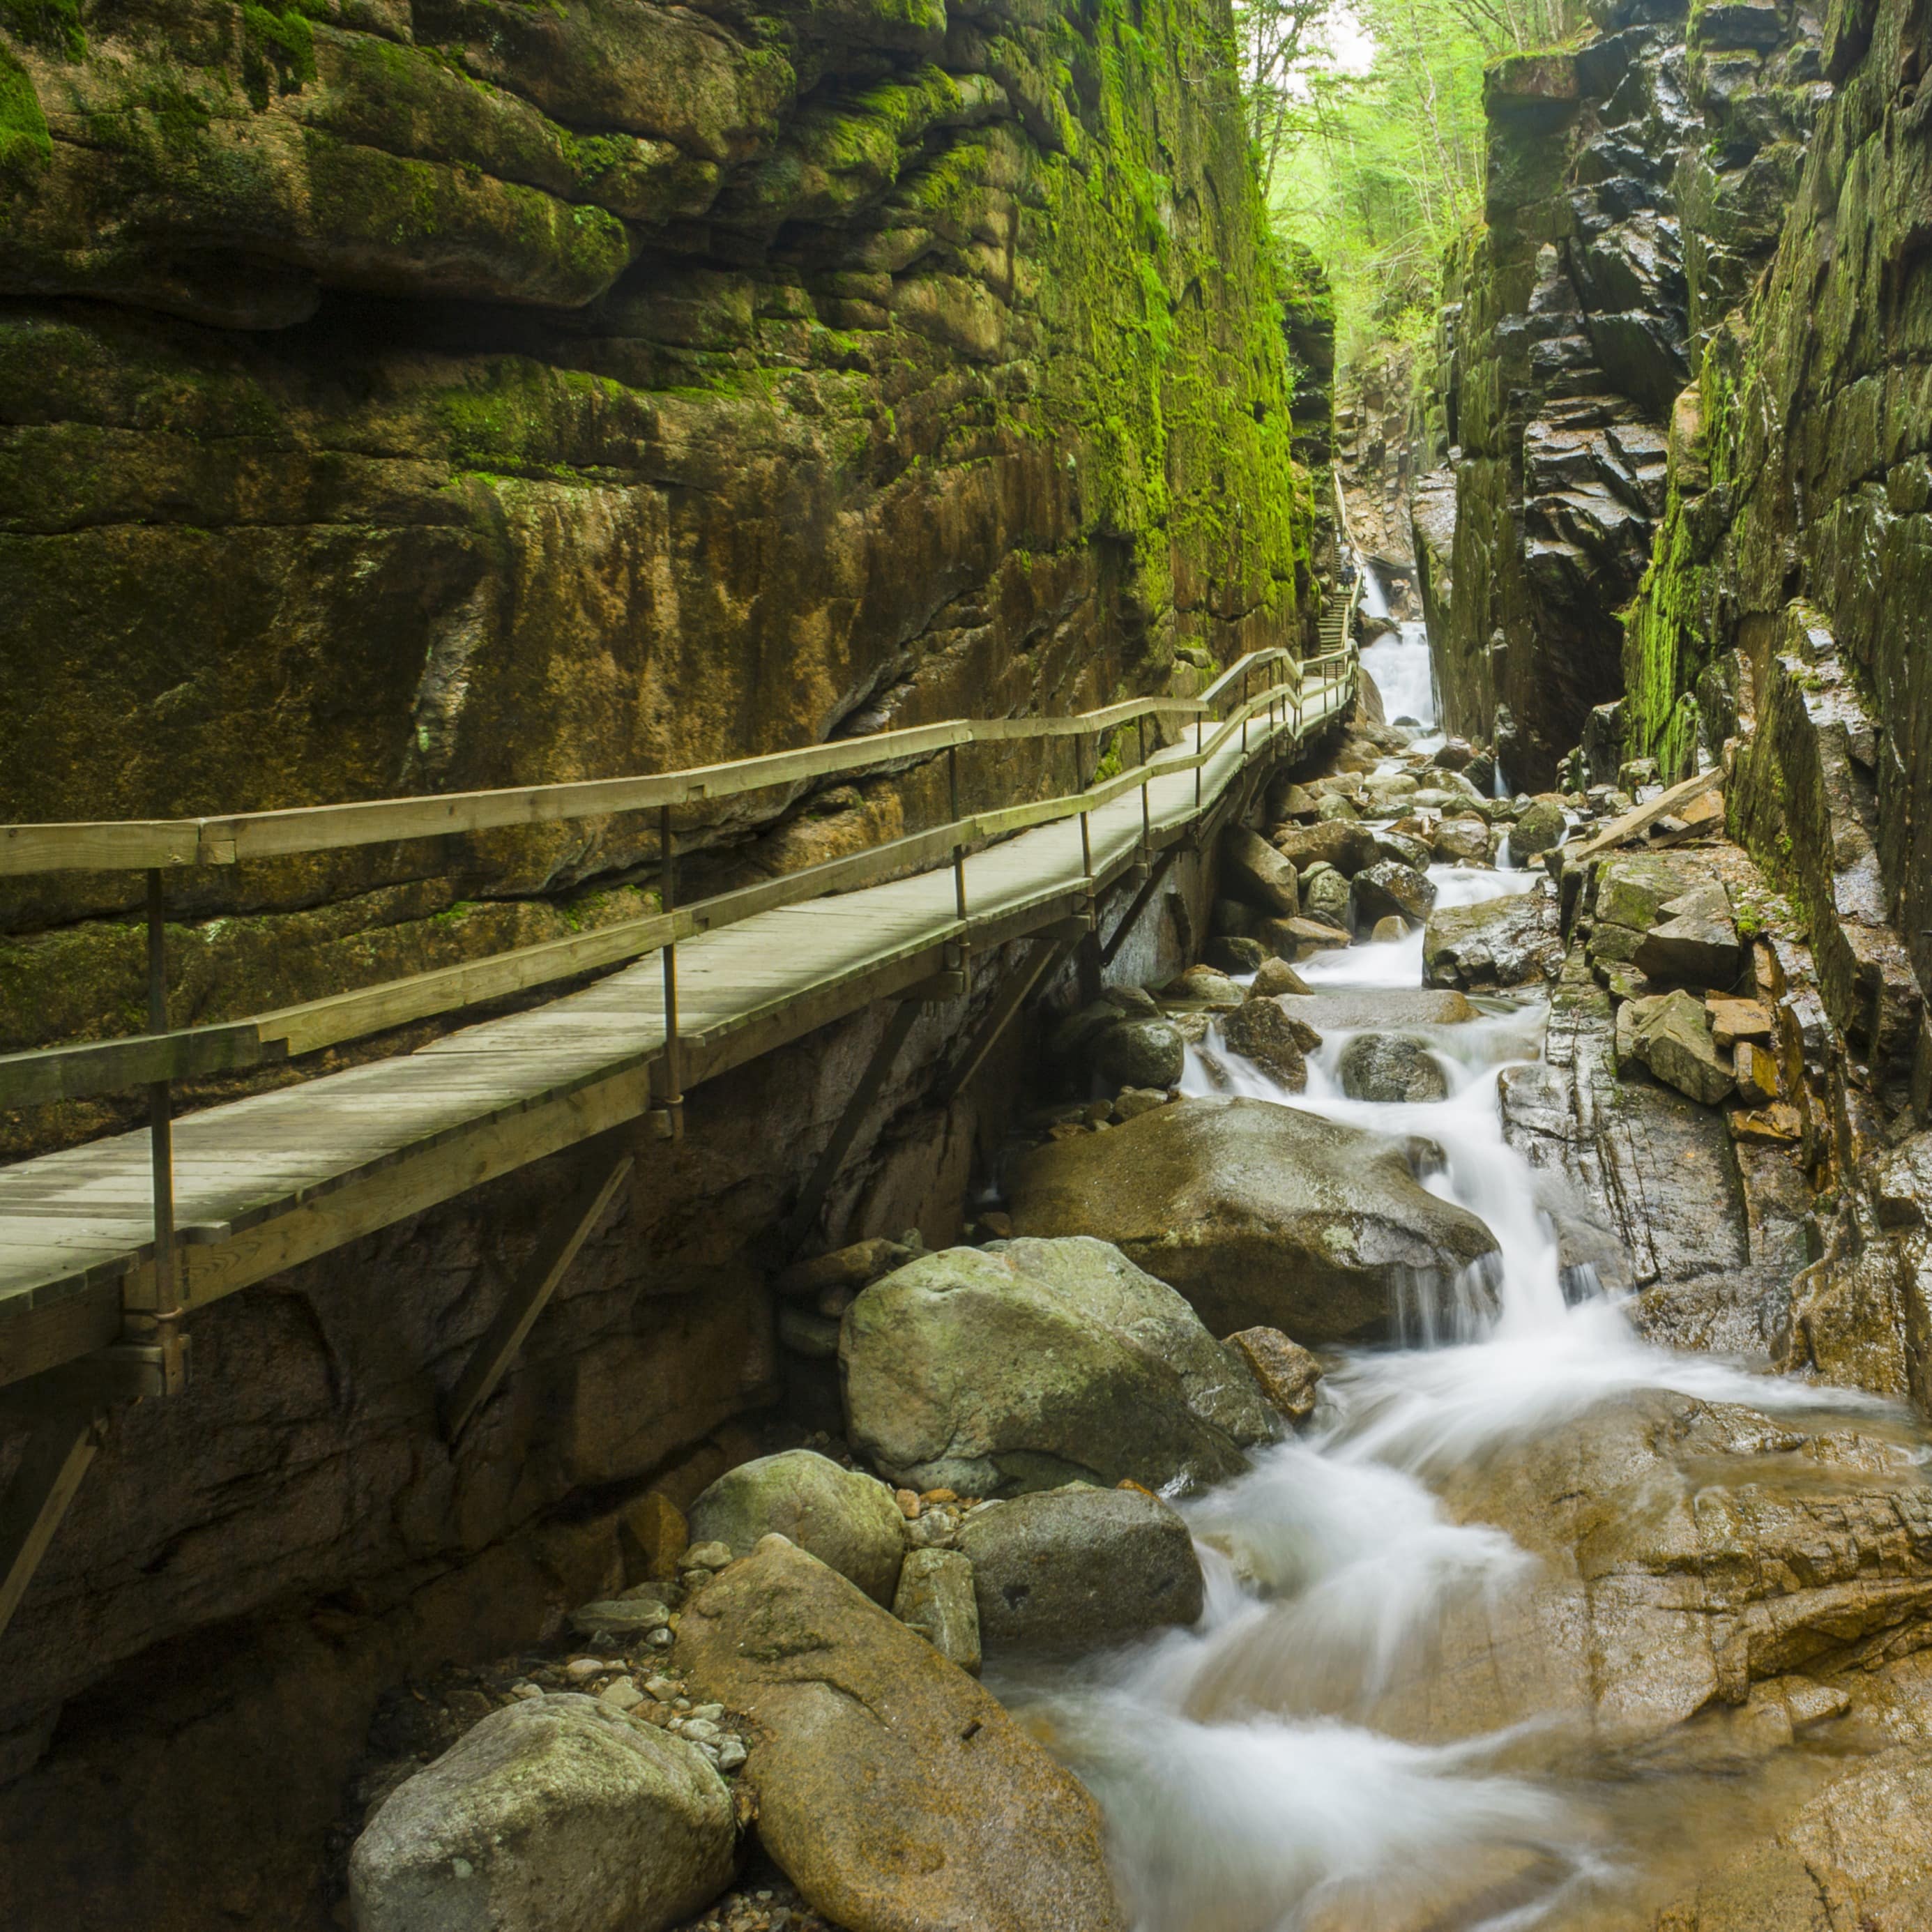 A long suspended bridge over surrounded by rocks in Flume Gorge in Franconia Notch State Park in New Hampshire